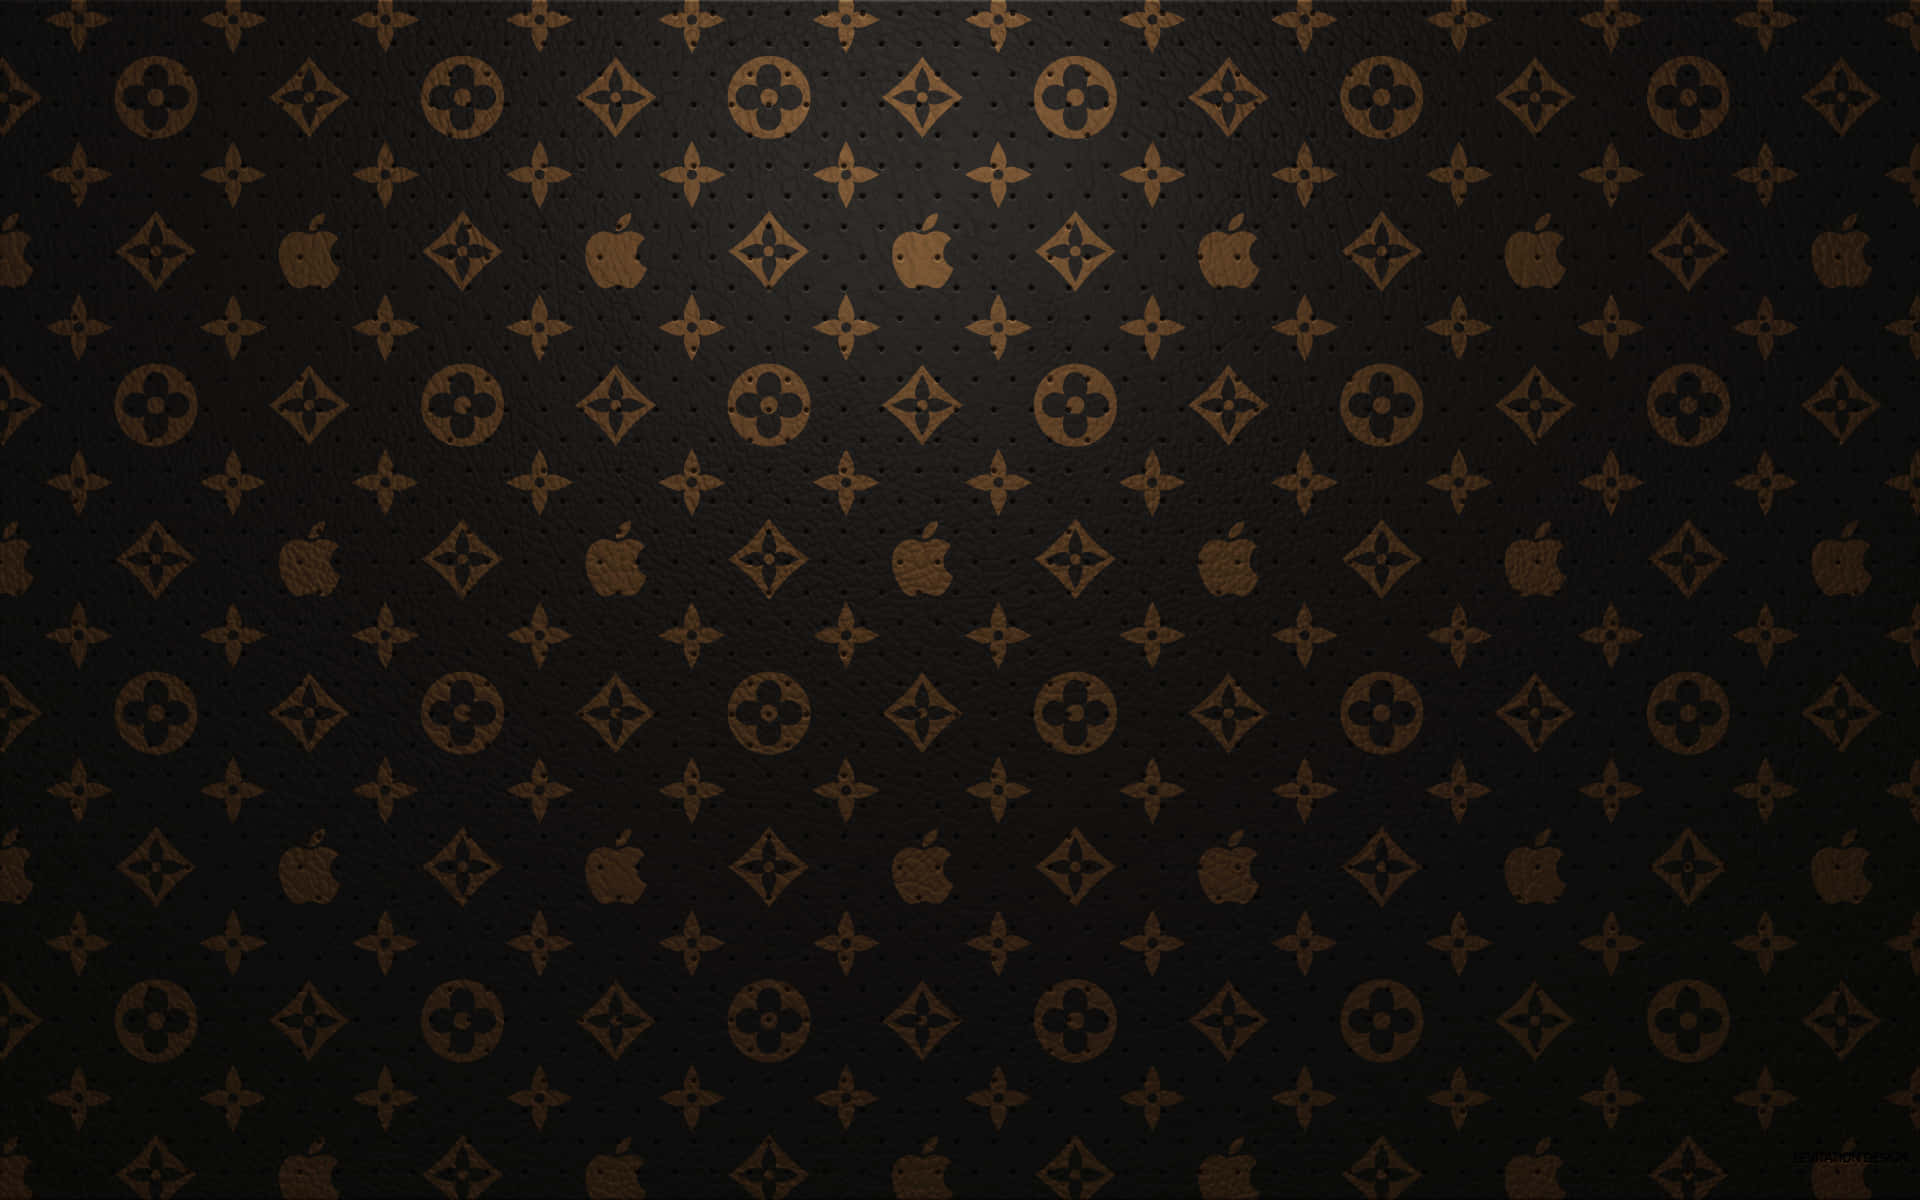 Spruce up your wardrobe with Cool Louis Vuitton Wallpaper